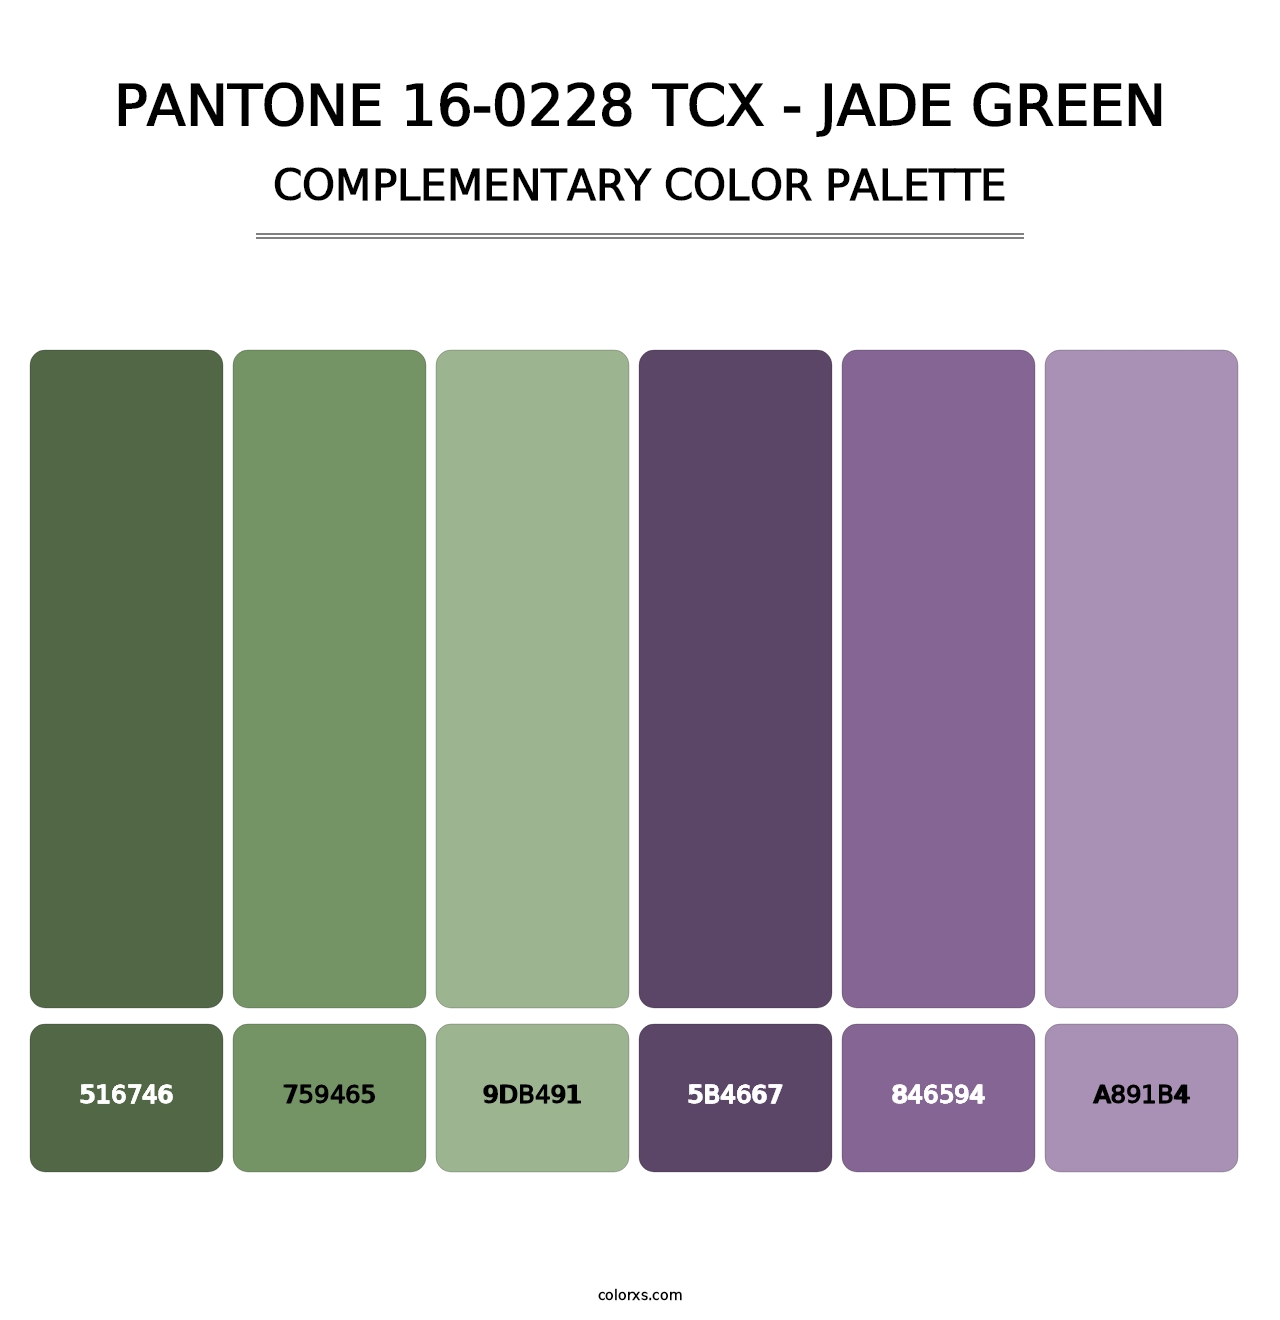 PANTONE 16-0228 TCX - Jade Green - Complementary Color Palette